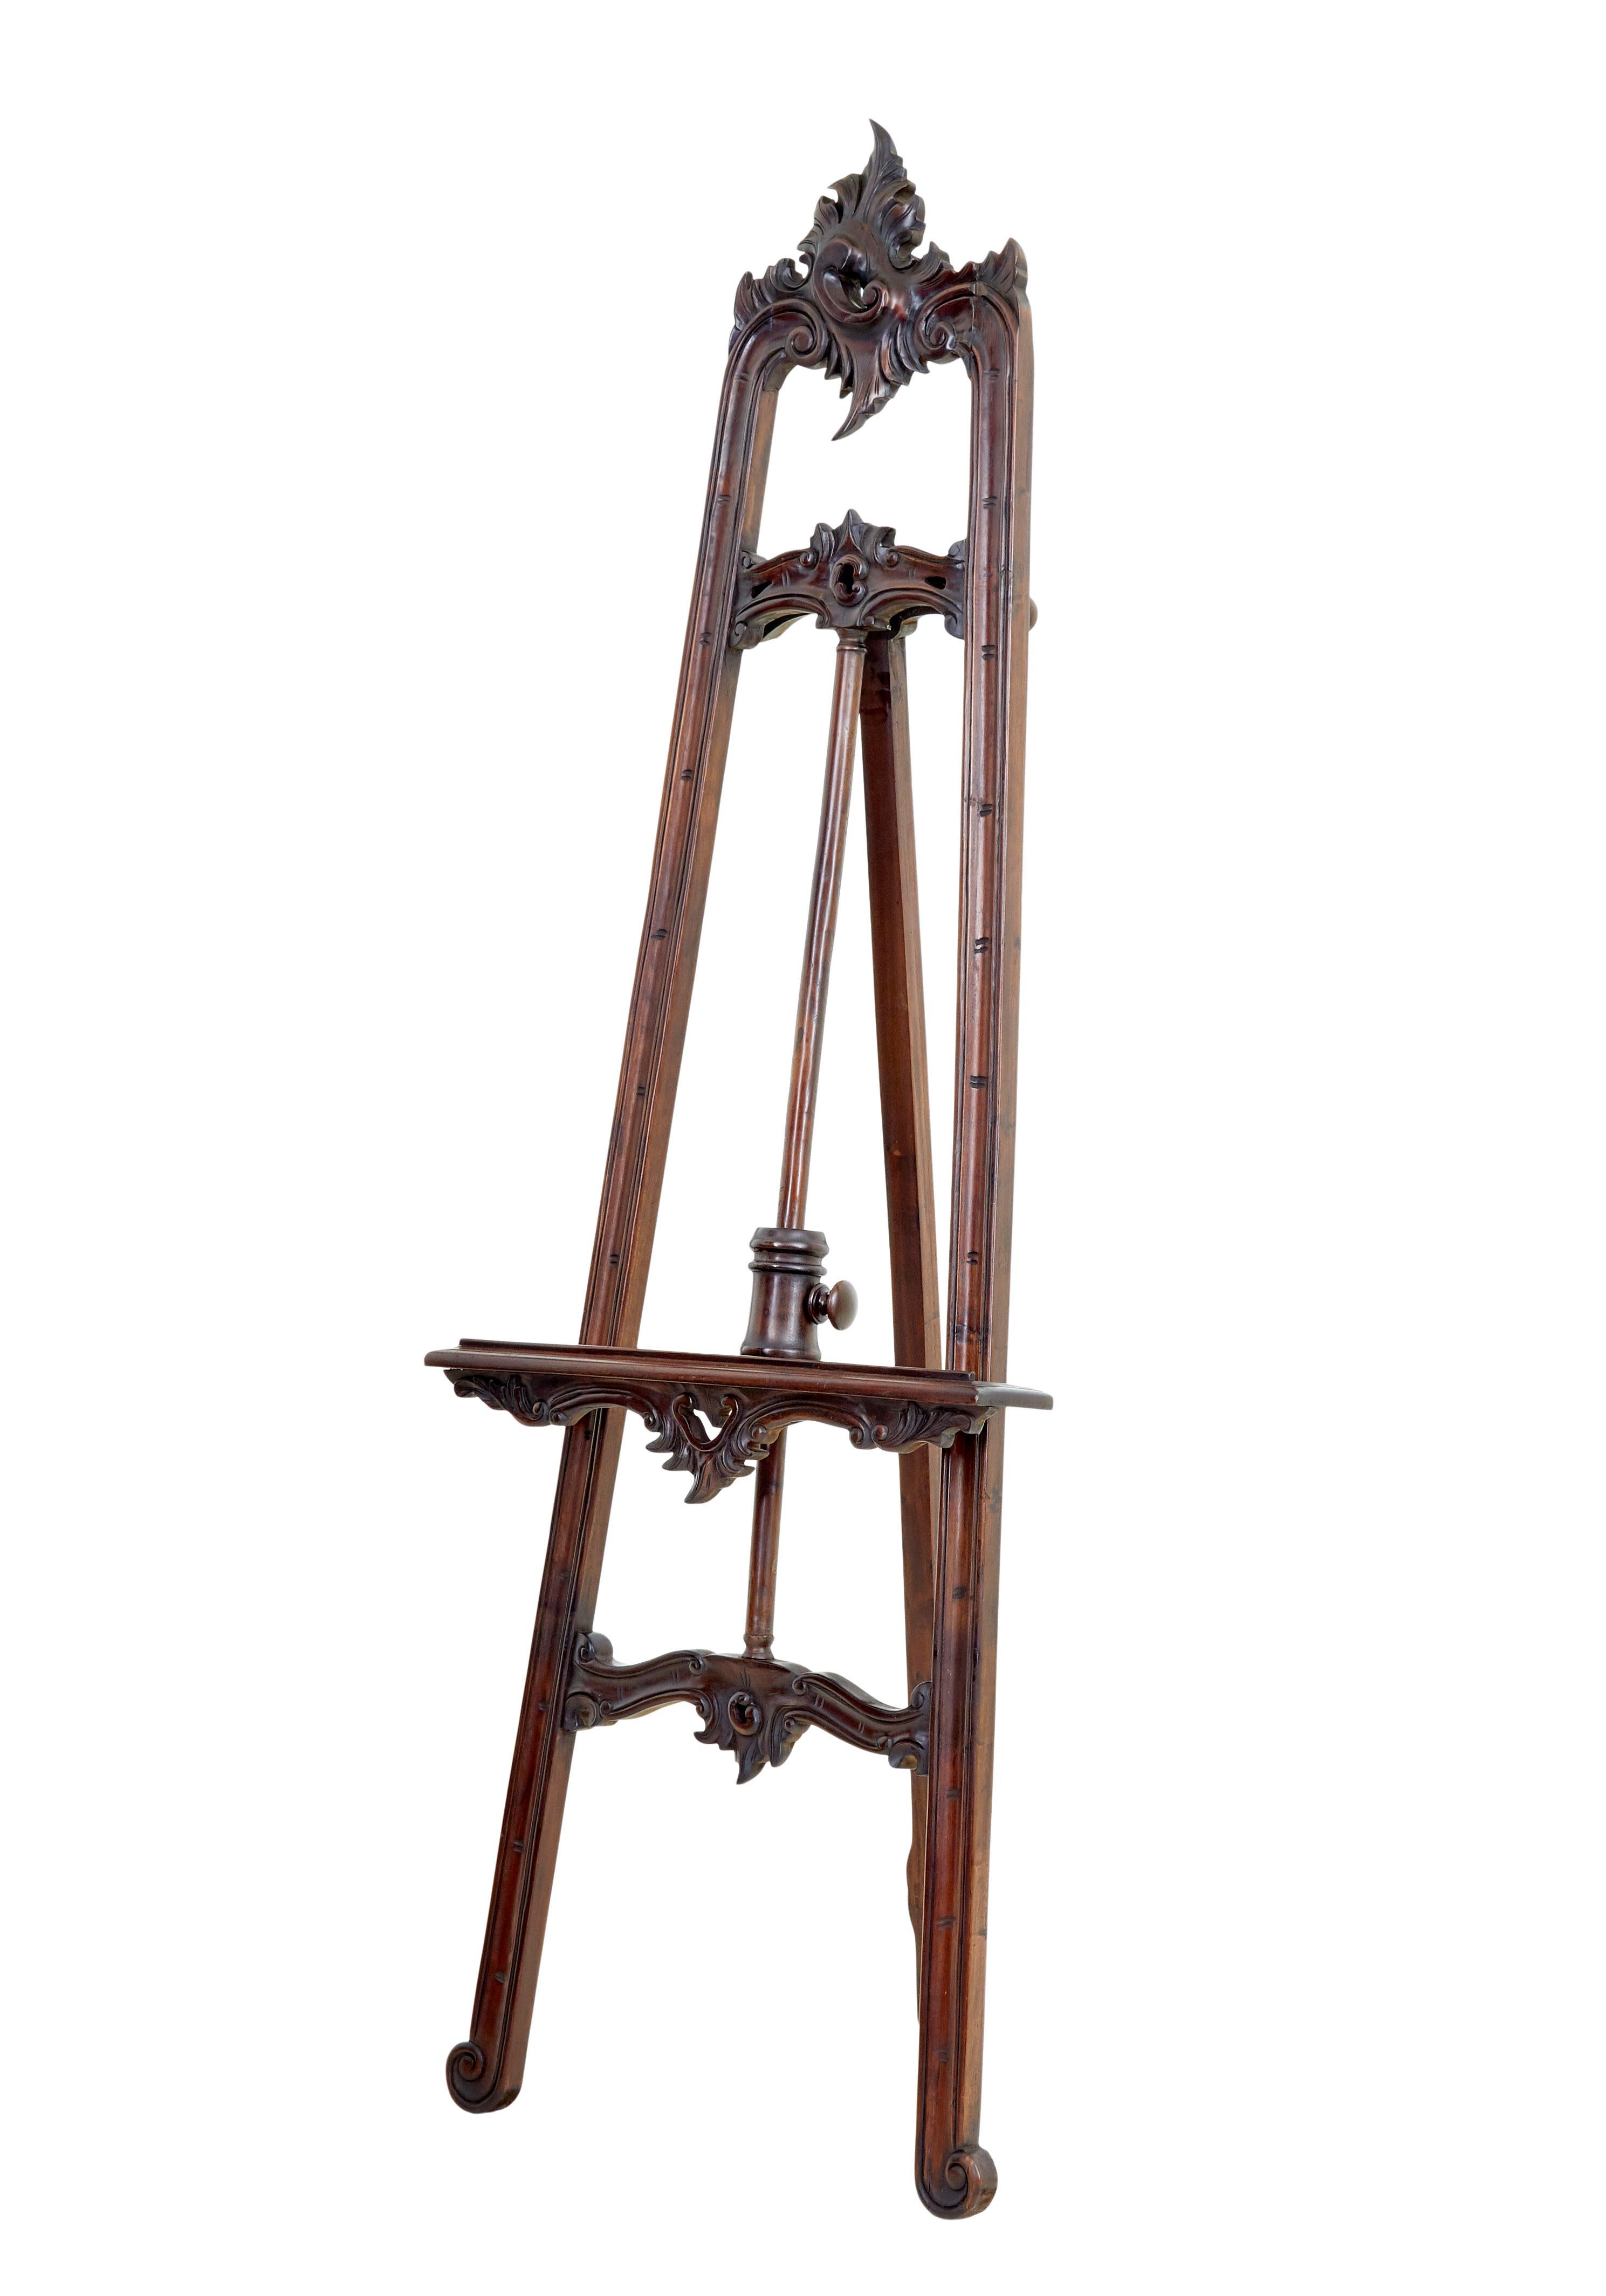 19th century carved mahogany easel circa 1890.

Good quality piece of interior decoration, we used this piece to display art work in our showroom.

Hand carved with swags, scrolls and acanthus leaves.  Adjustable bottom rail allowing the frame to